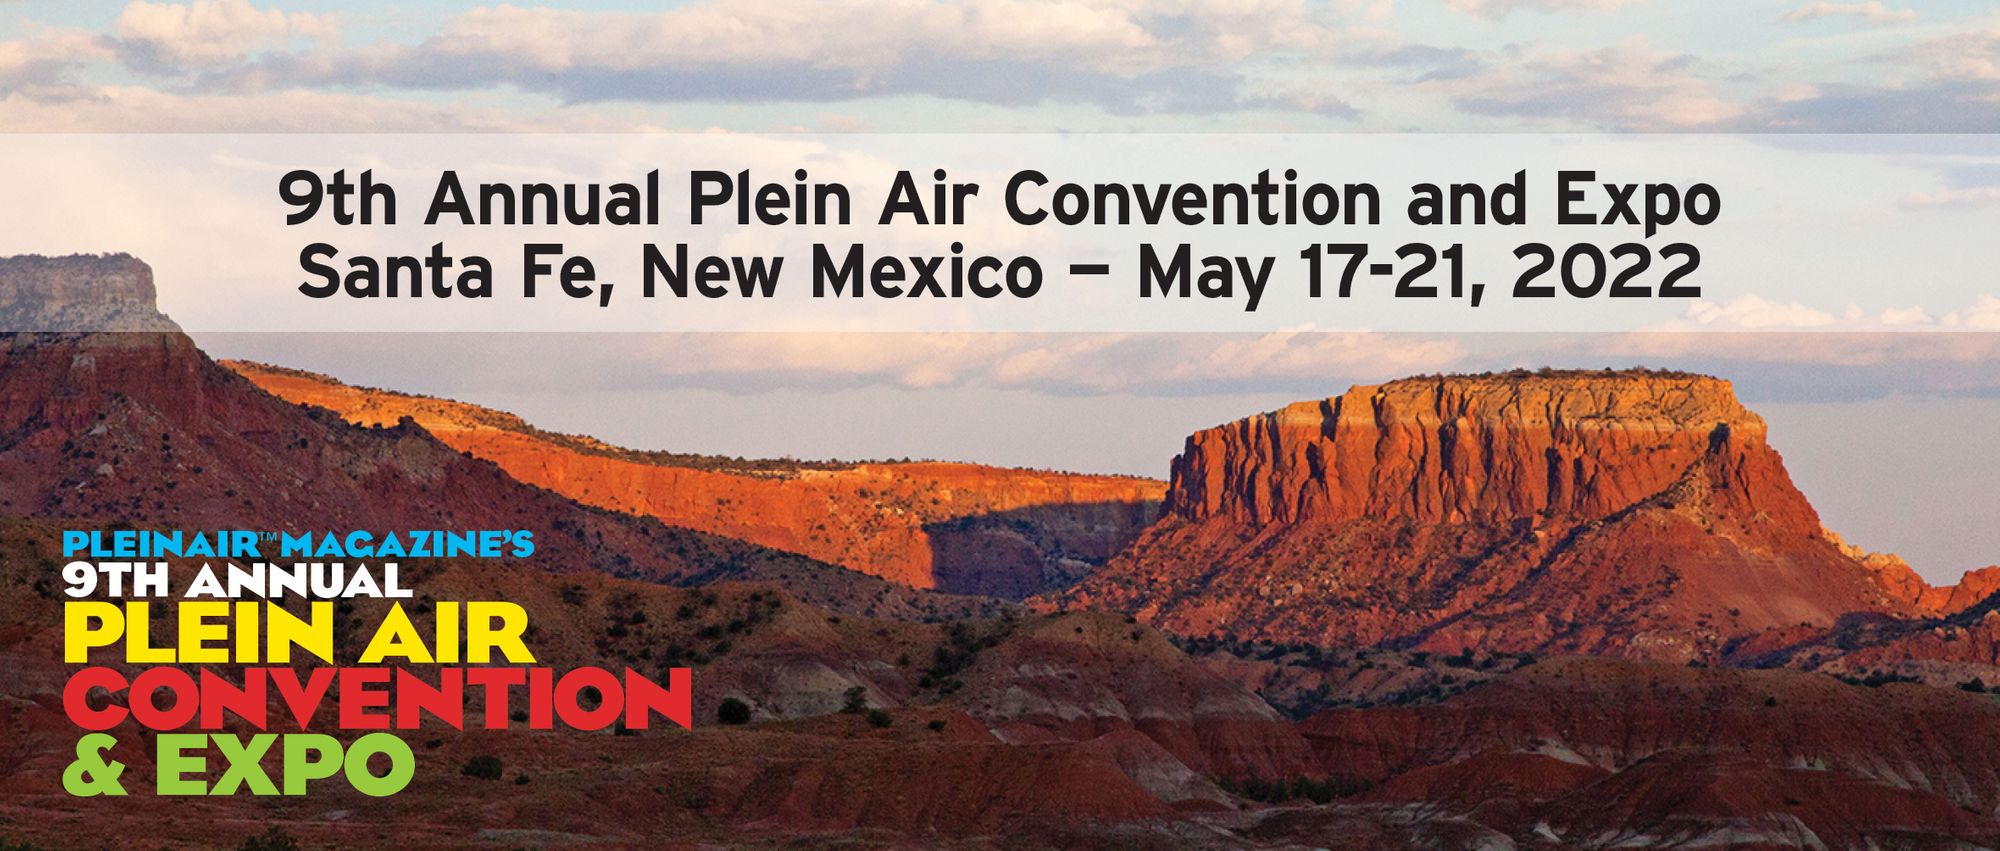 plein air convention and expo